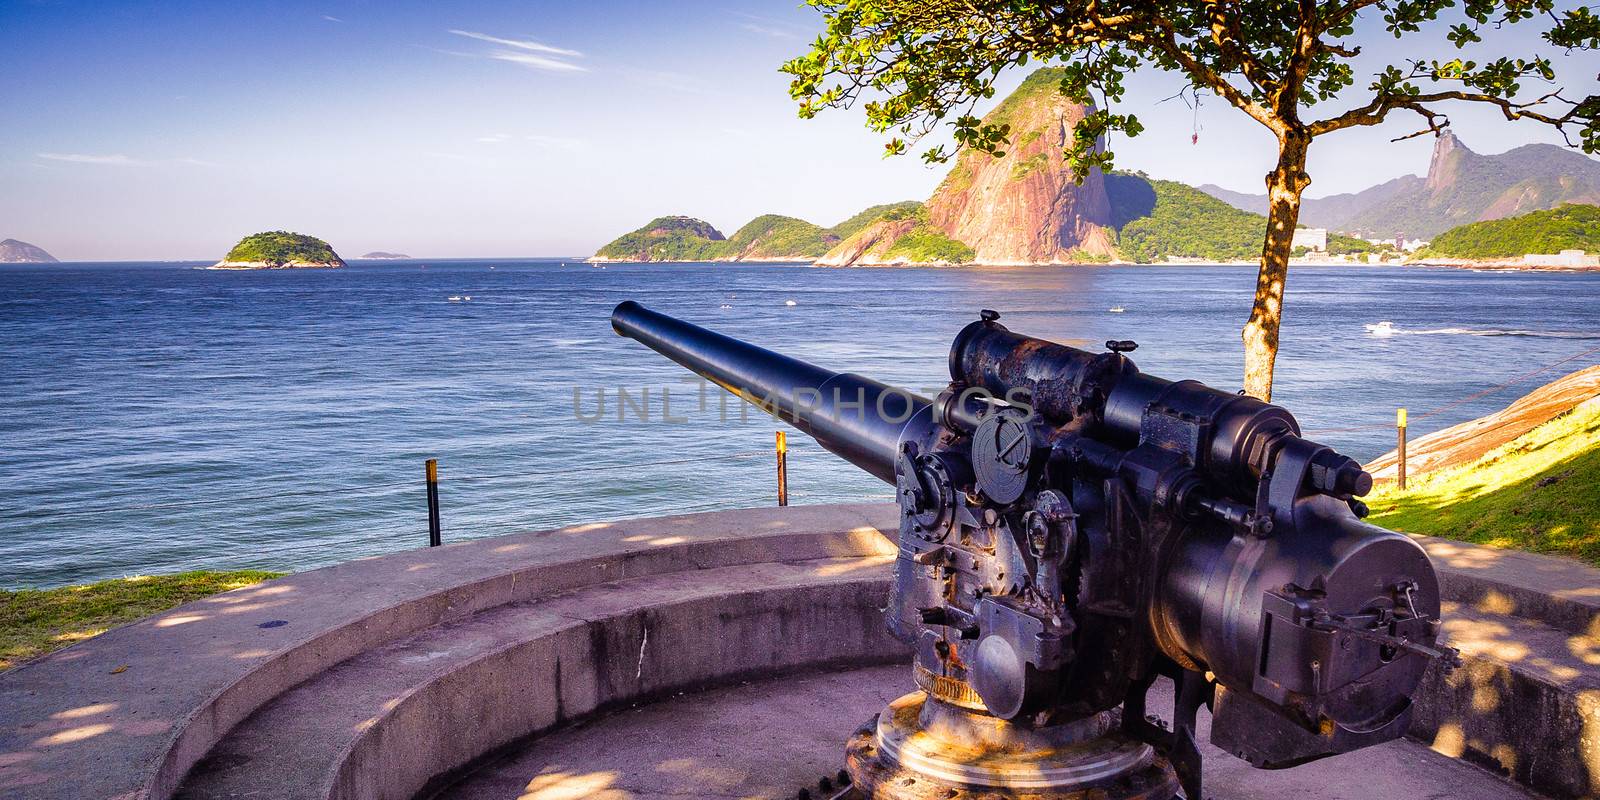 Cannon at the terrace of a fort with Sugarloaf Mountain in the background, Santa Cruz Fortress, Guanabara Bay, Niteroi, Rio de Janeiro, Brazil